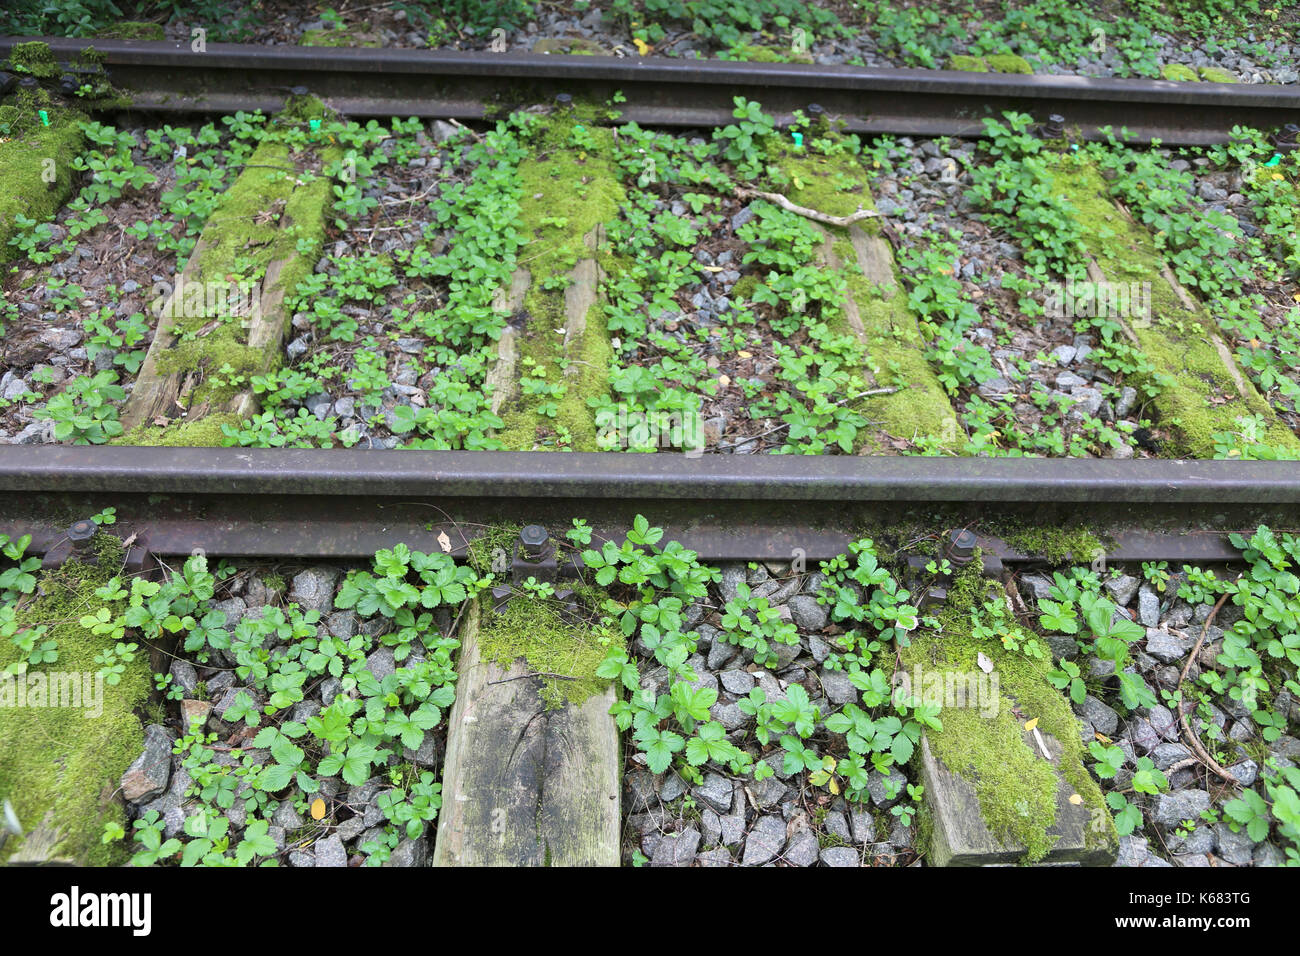 rails of an abandoned track for trains in the forest with plants Stock Photo